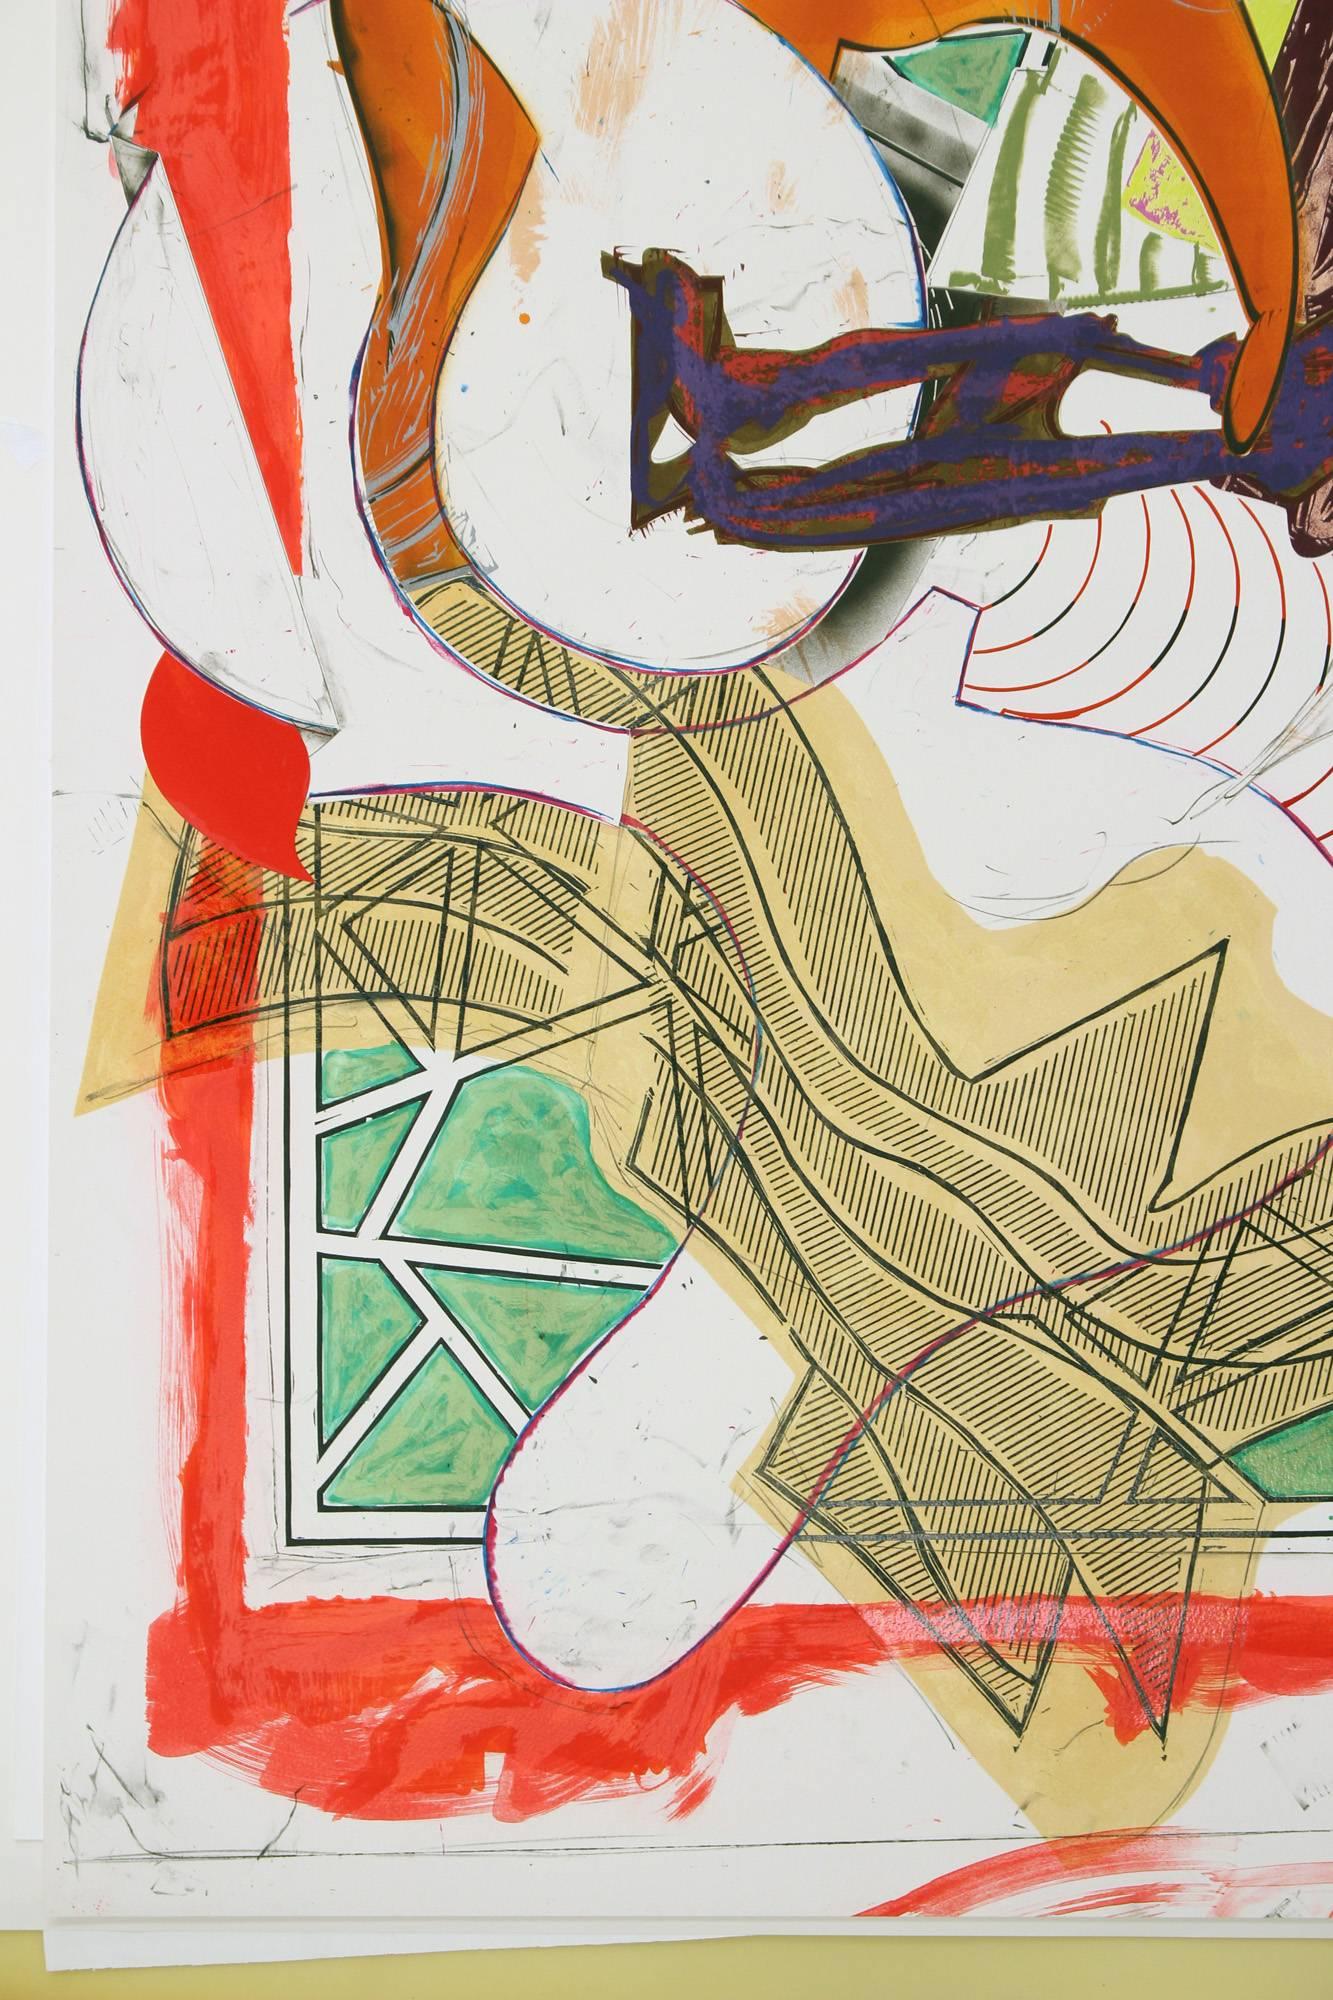 Hark! is a 1988 print by Frank Stella that combines serigraph, lithograph, and linoleum block with hand-coloring and collage. Hark! is part of Frank Stella's monumental Waves series. Waves includes thirteen multi-media prints that focus on Herman